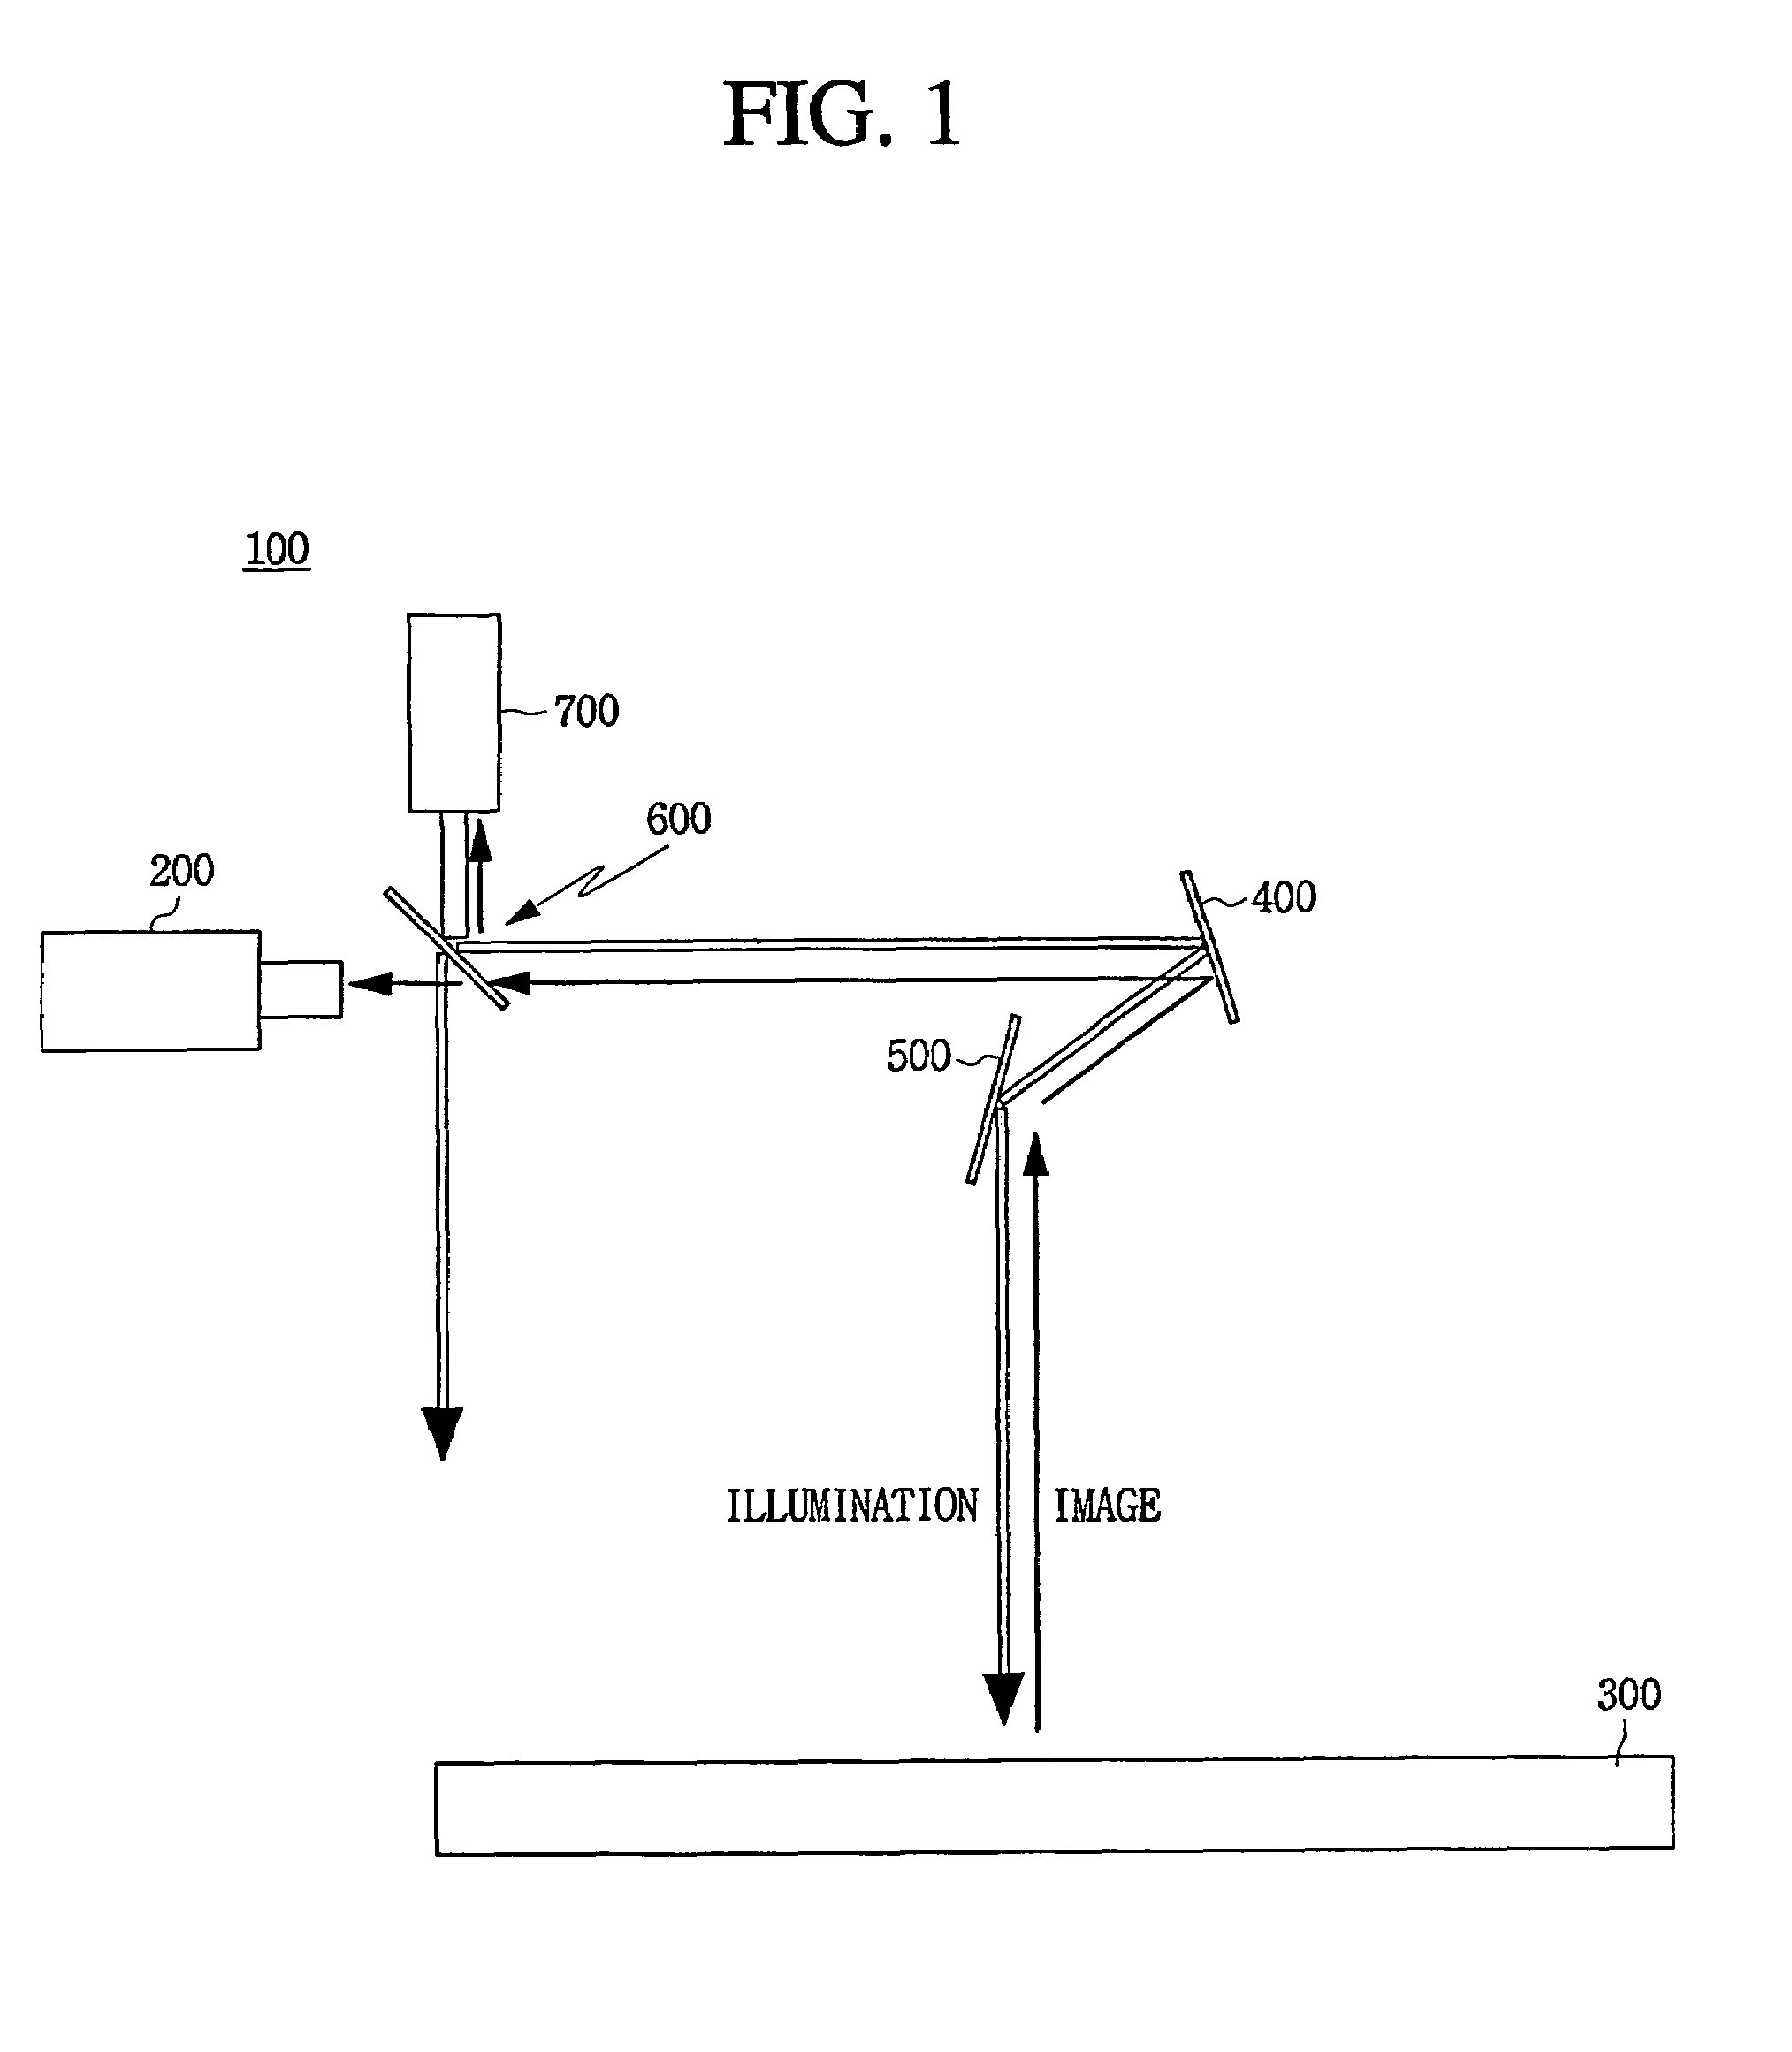 Vision inspection apparatus using a full reflection mirror